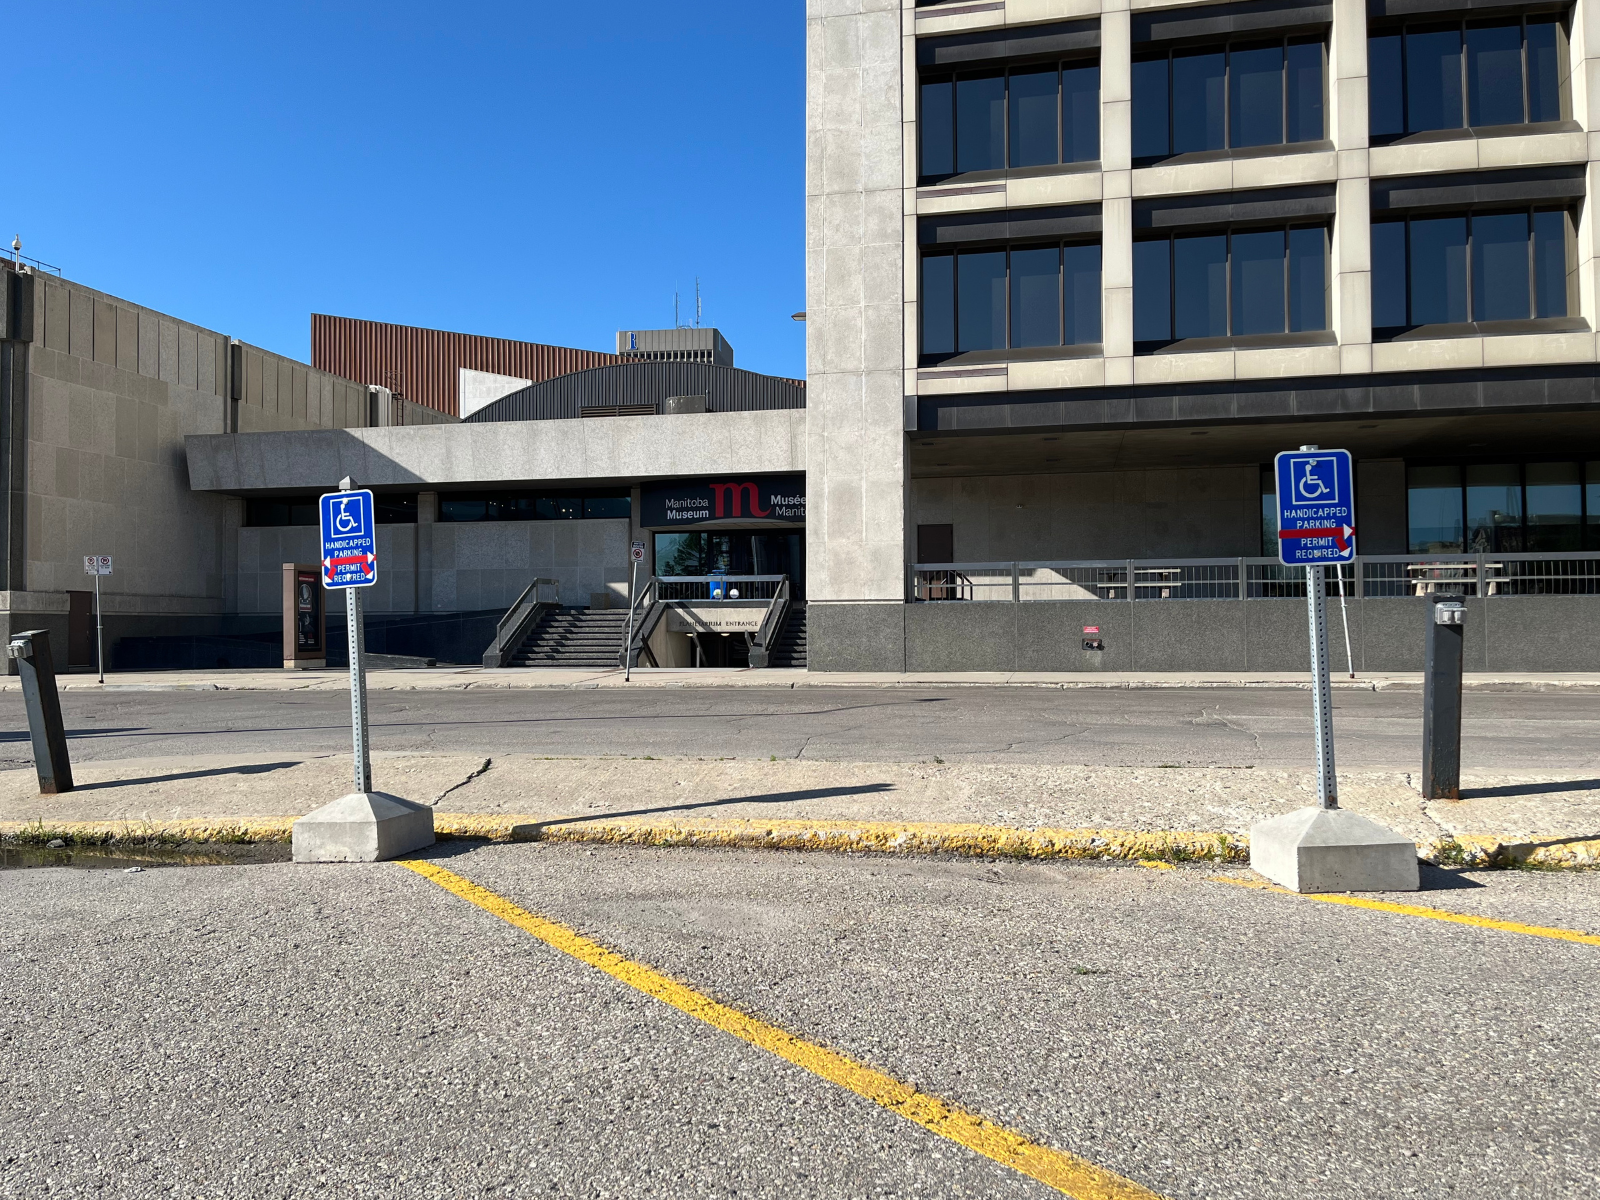 Photograph looking at the Manitoba Museum Rupert entrance from the parking lot. Two signs identify three handicapped parking spaces.